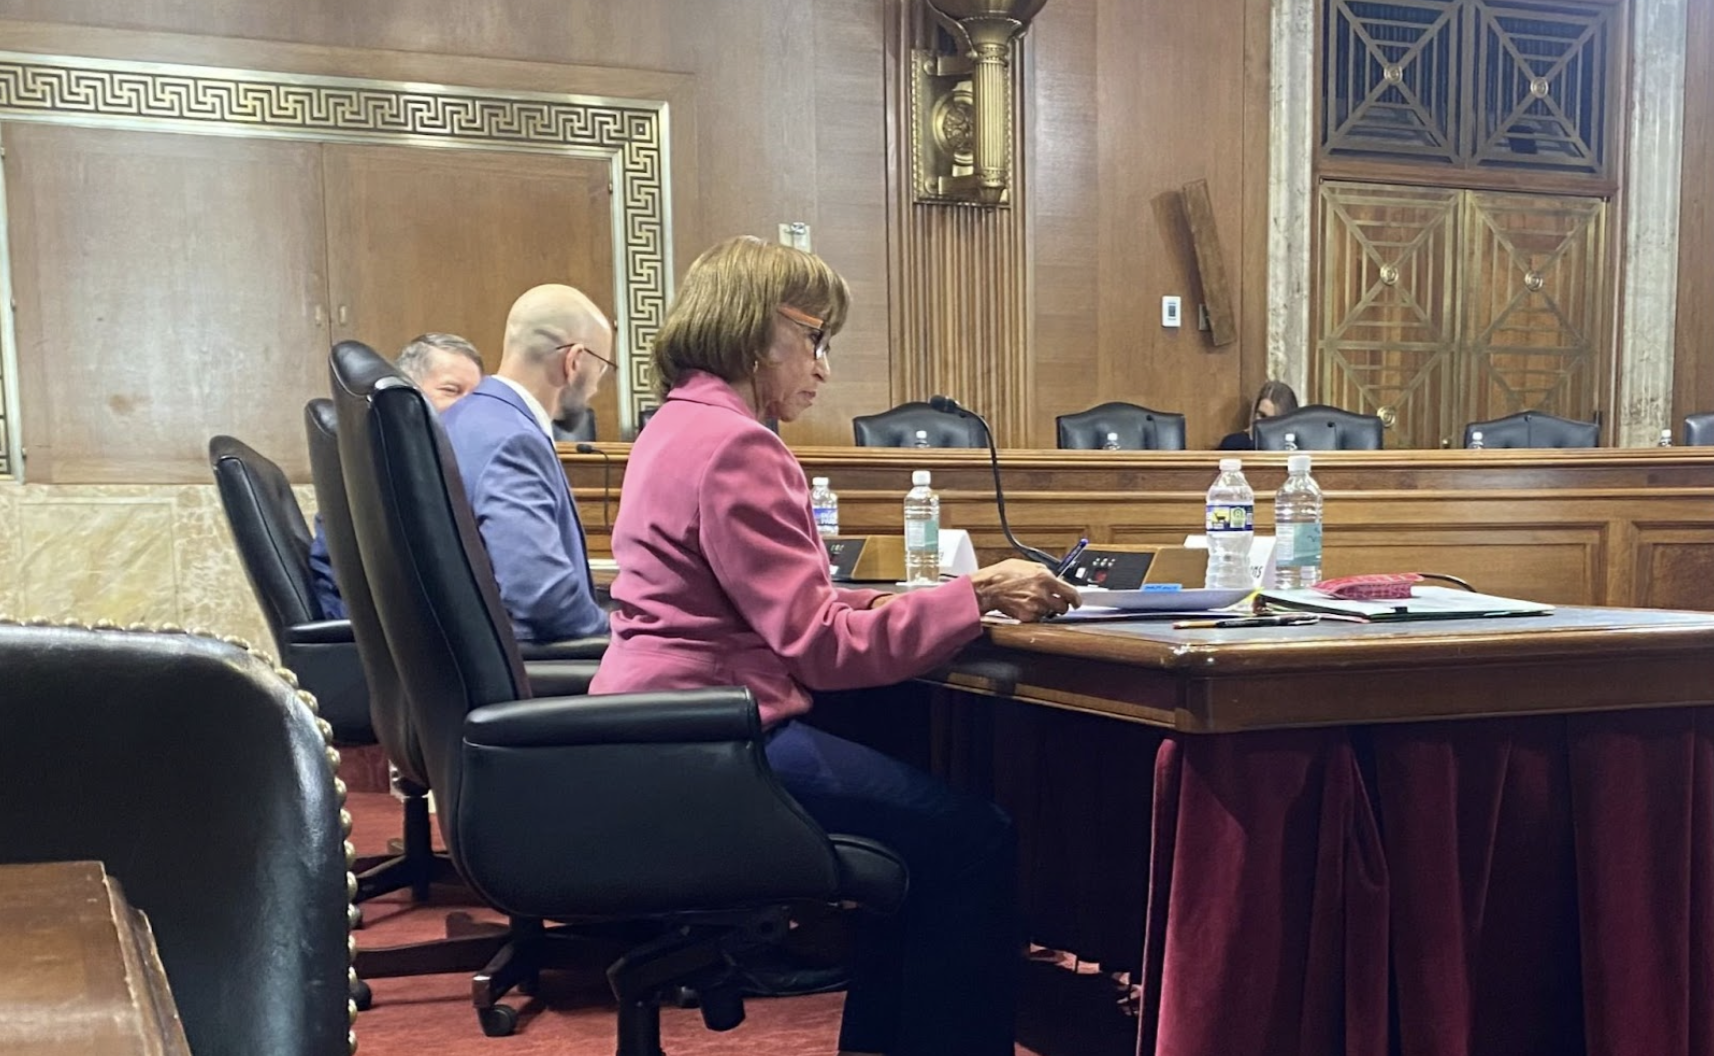 Glenda Owens, deputy director of the Office of Surface Mining Reclamation and Enforcement at the U.S. Department of the Interior prepares to testify at the hearing on Nov. 9.